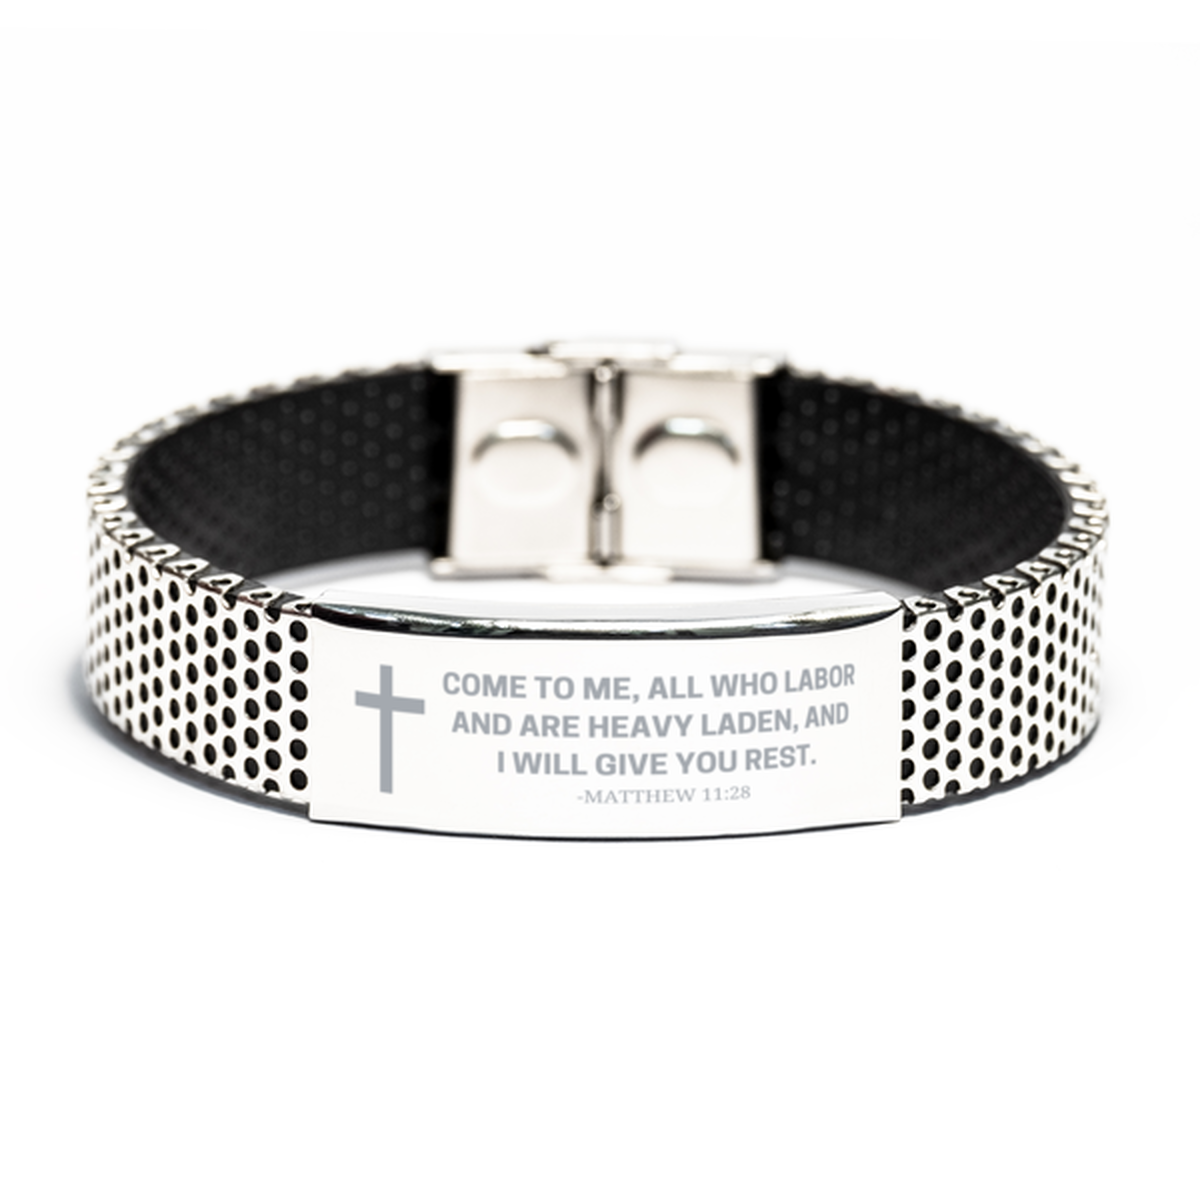 Baptism Gifts For Teenage Boys Girls, Christian Bible Verse Stainless Steel Bracelet, Come to me, all who labor, Catholic Confirmation Gifts for Son, Godson, Grandson, Nephew